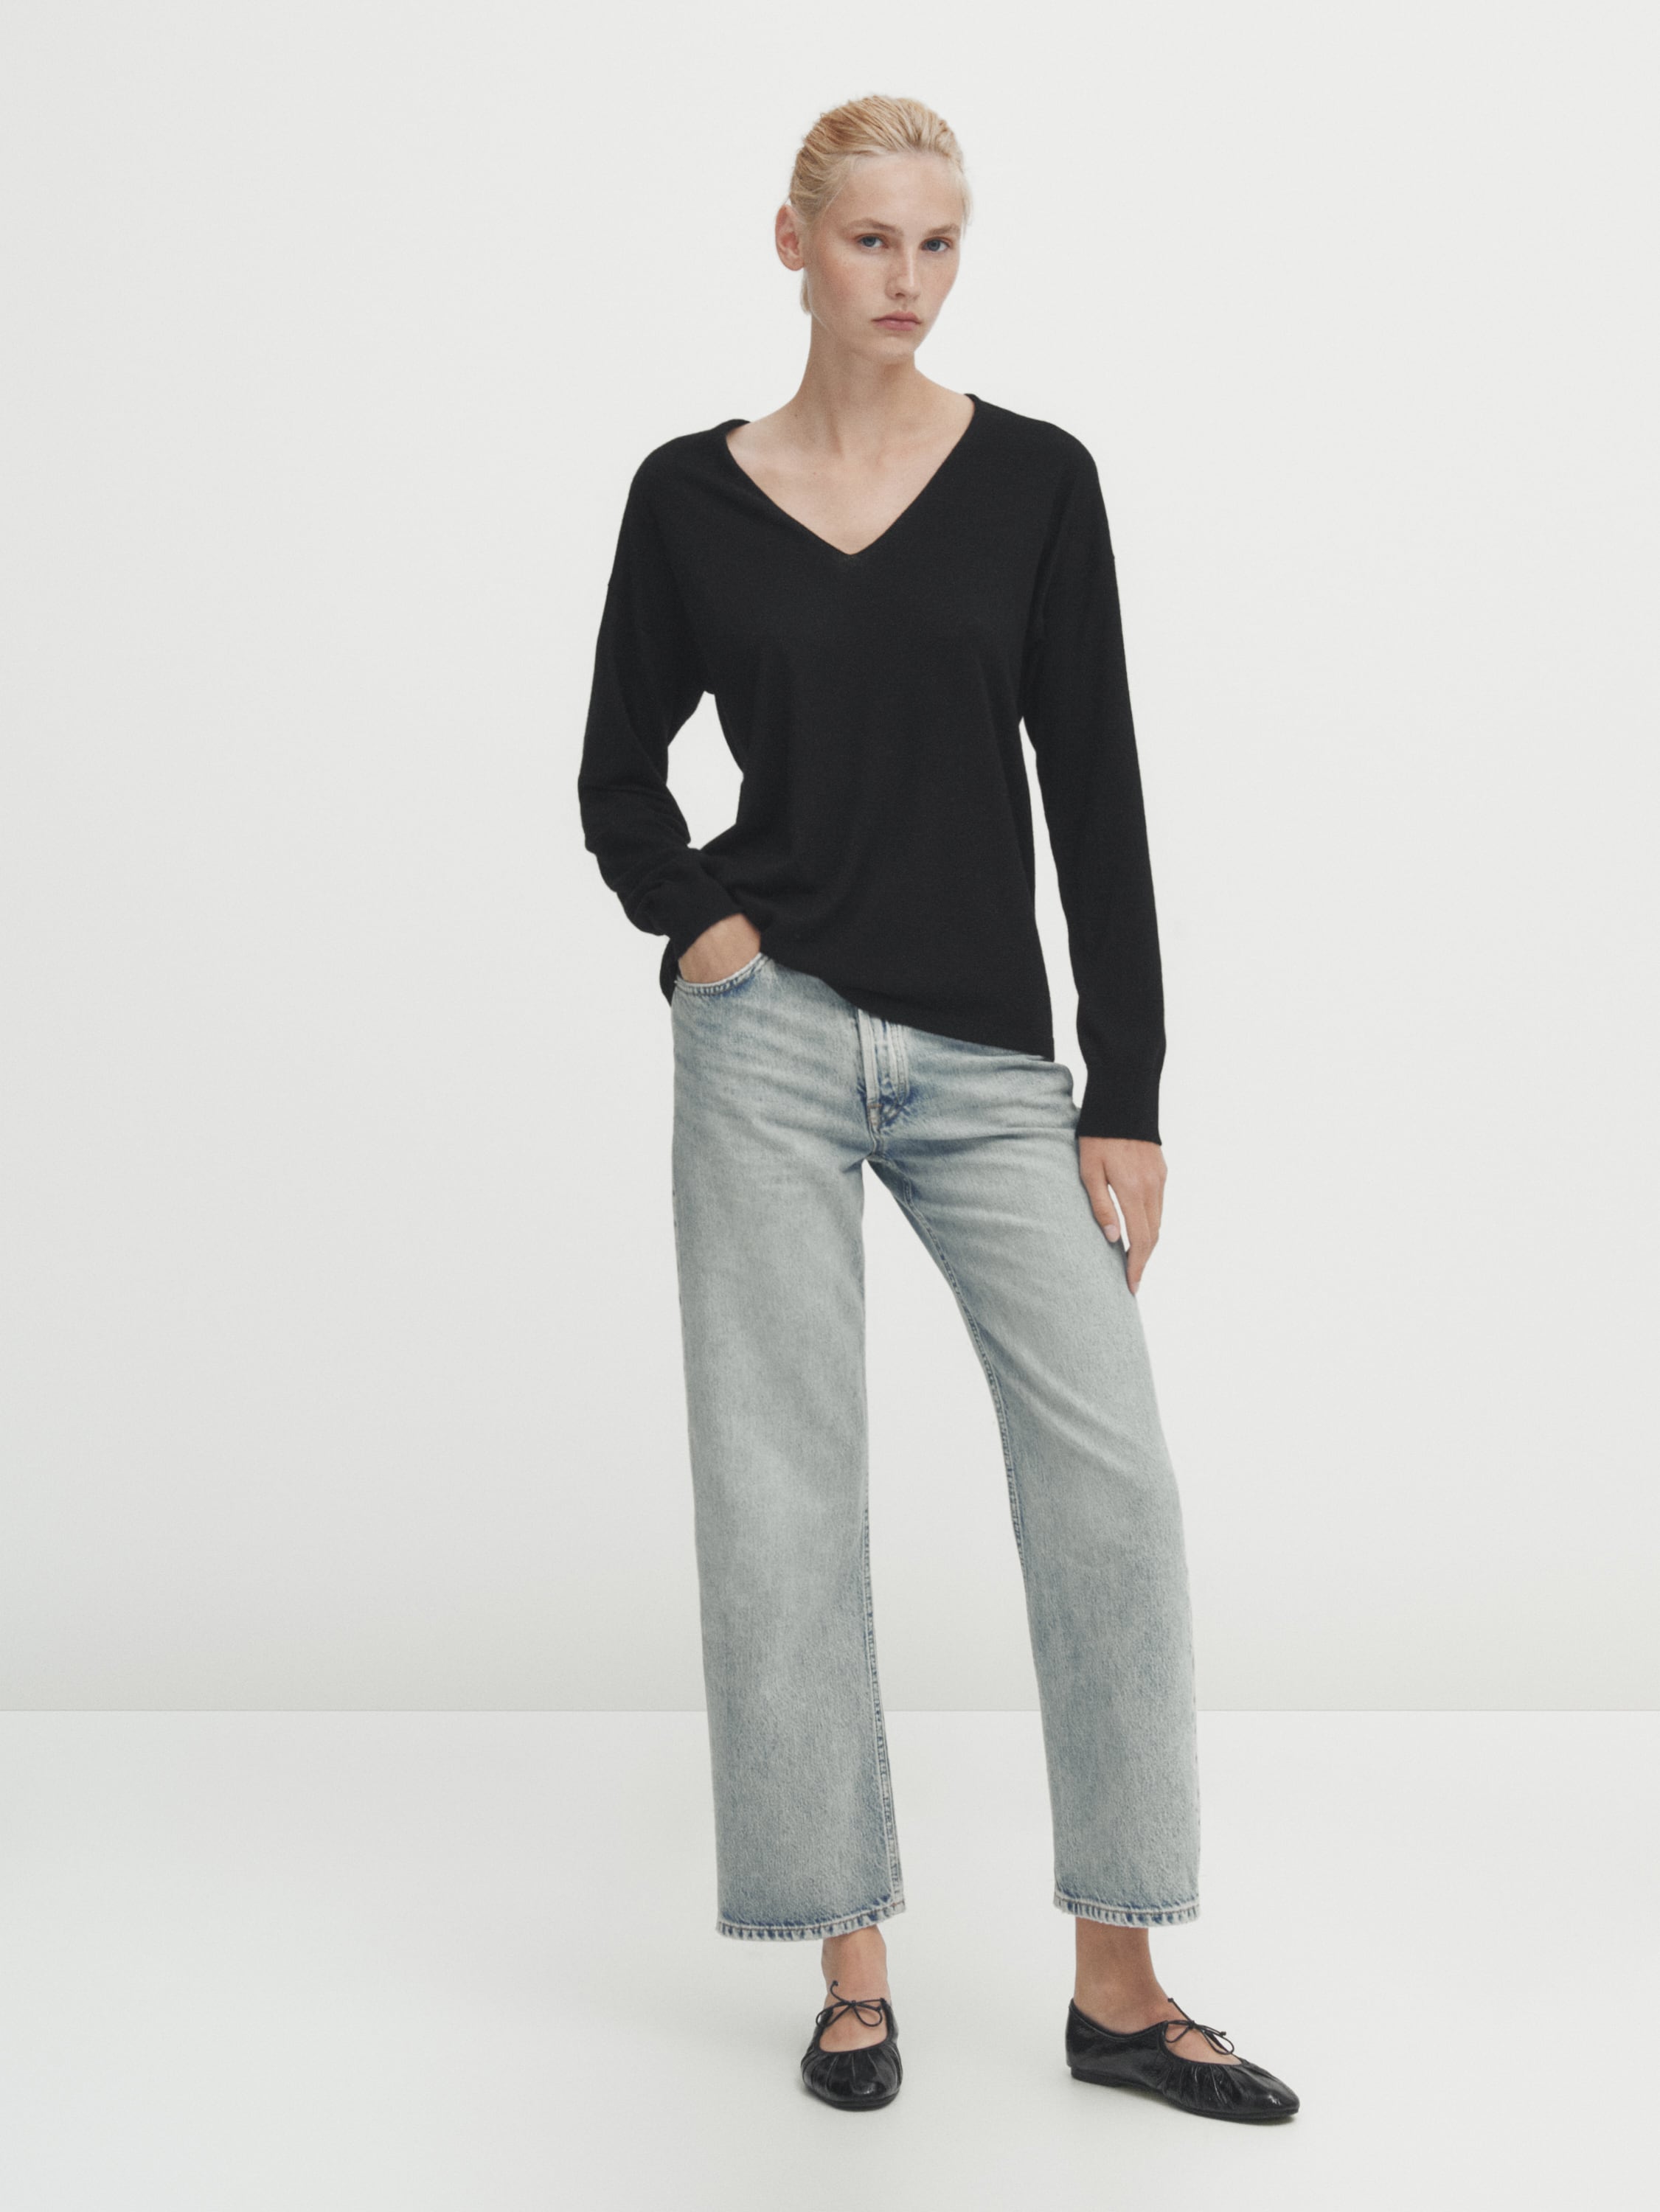 Wool and cashmere V-neck sweater